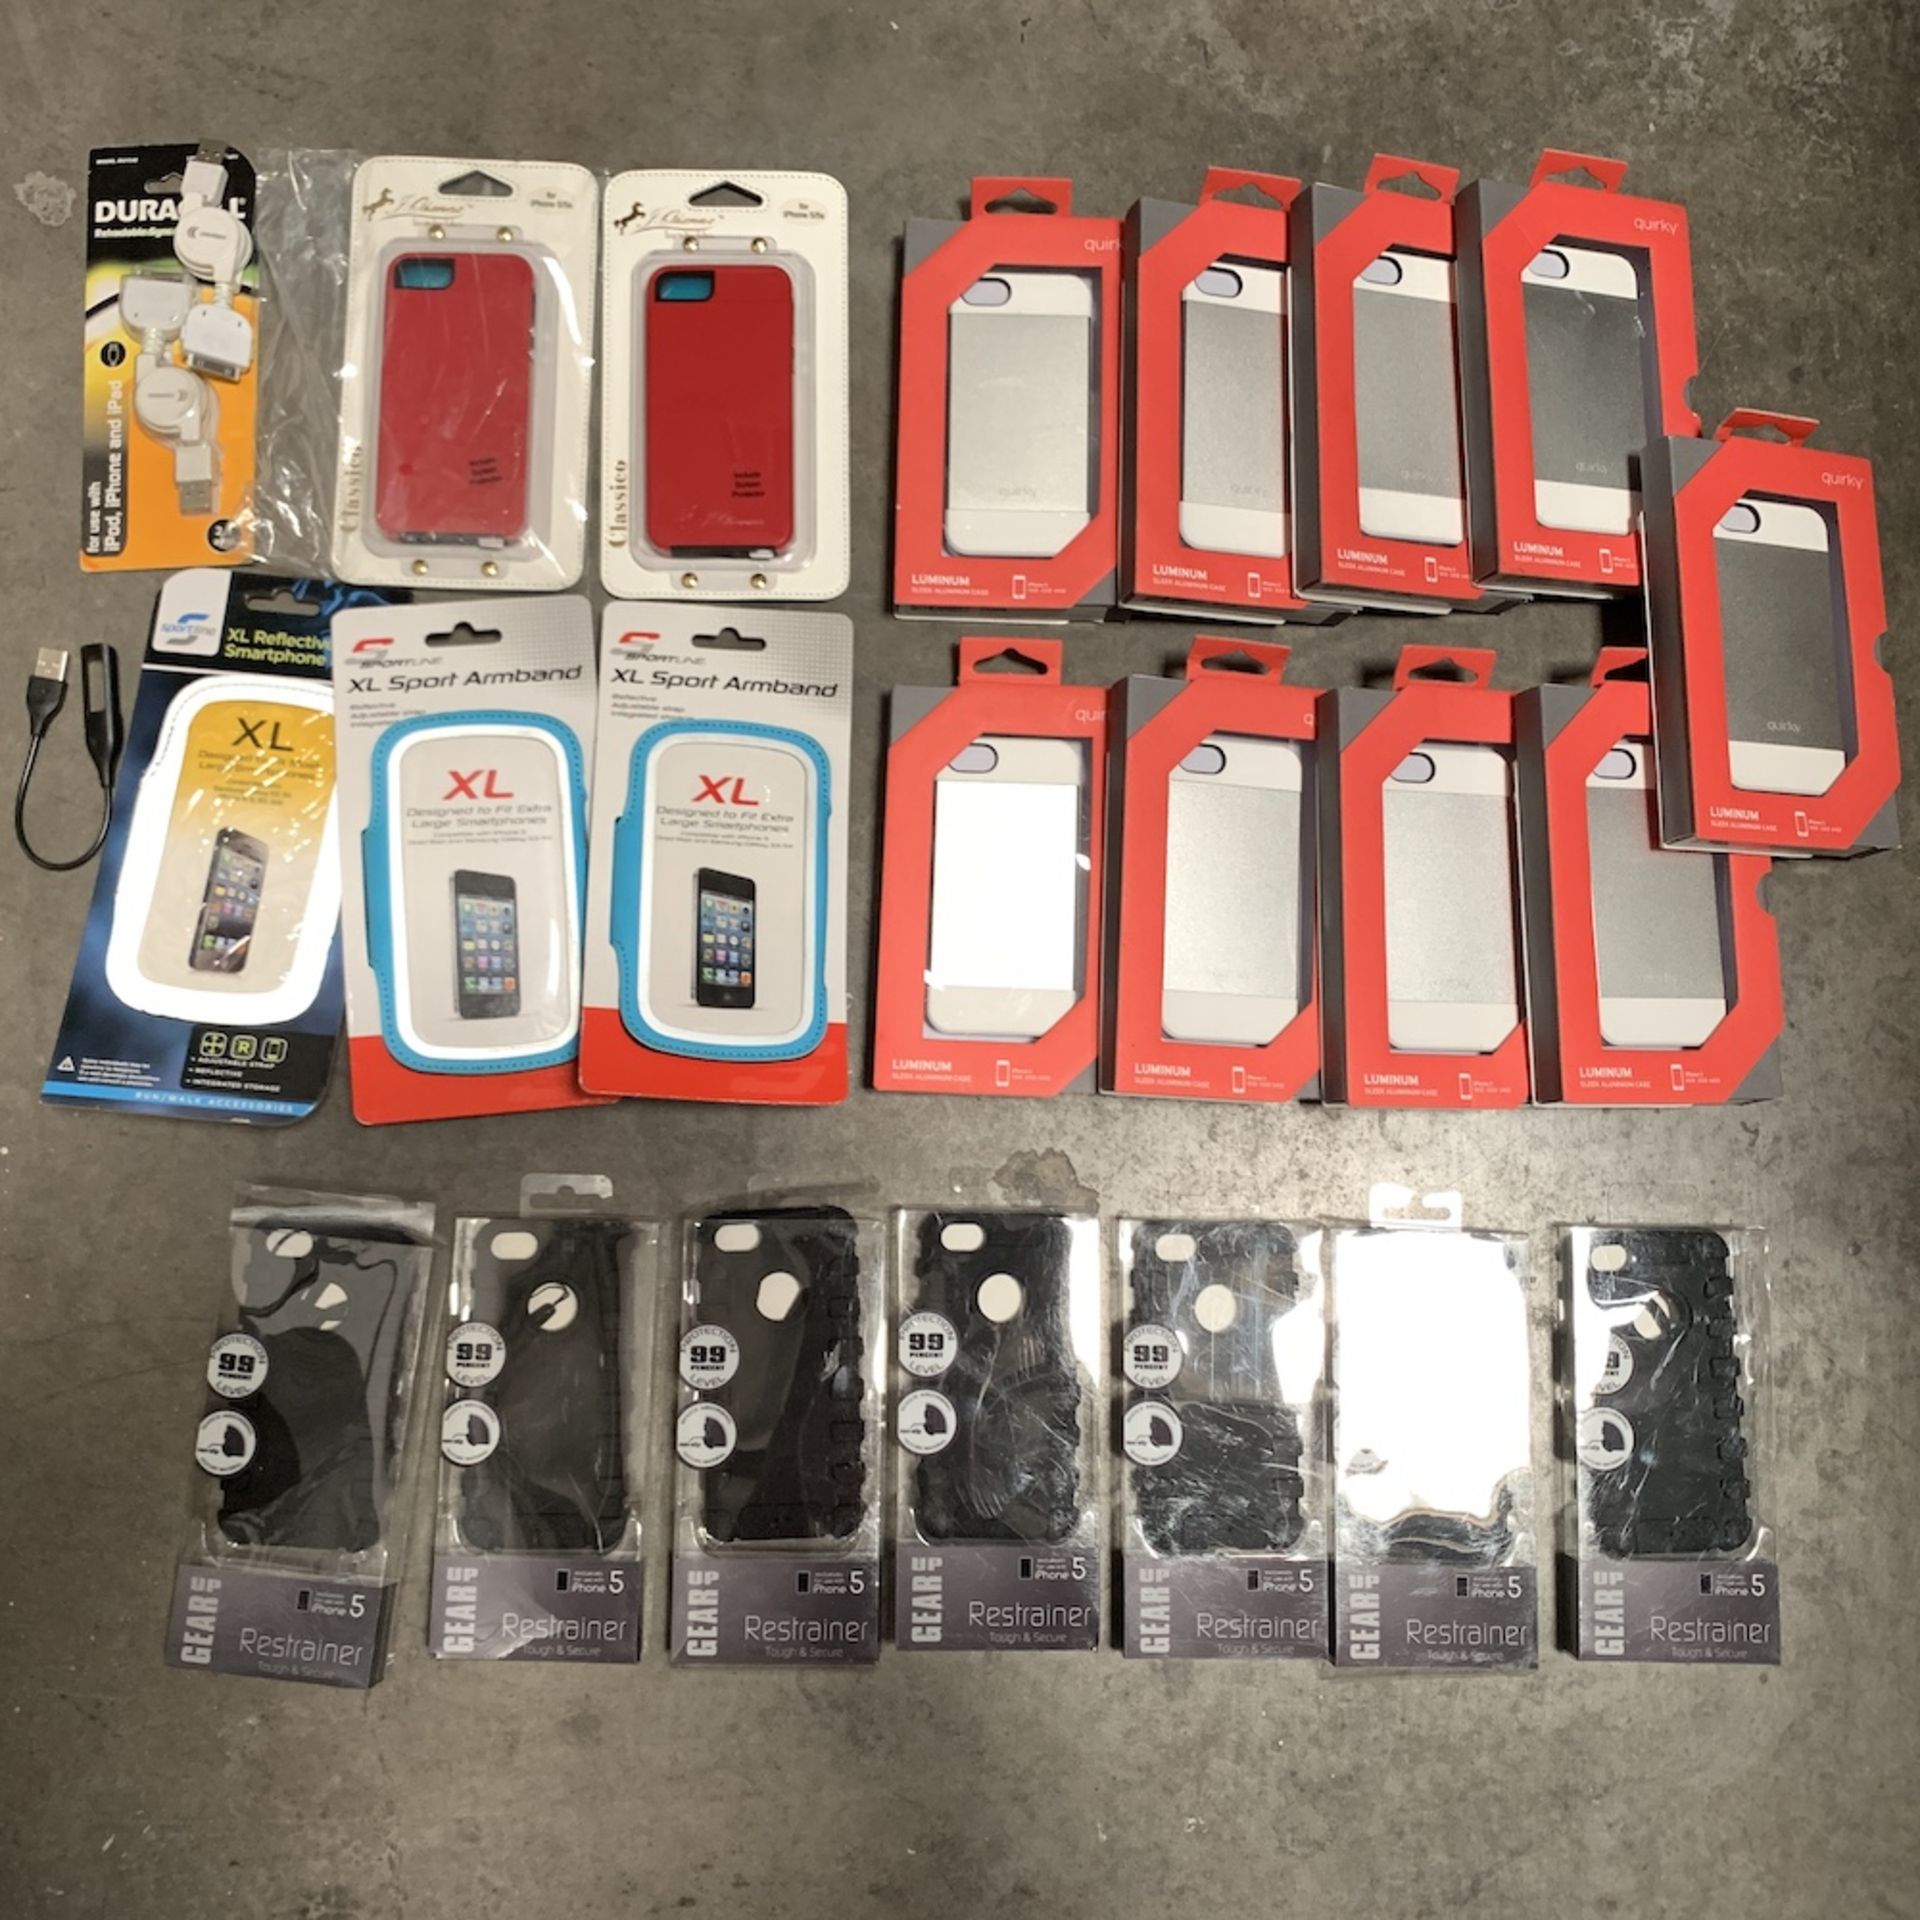 Lot of 24 iPhone Cases, Chargers, and Phone Armband Accessories